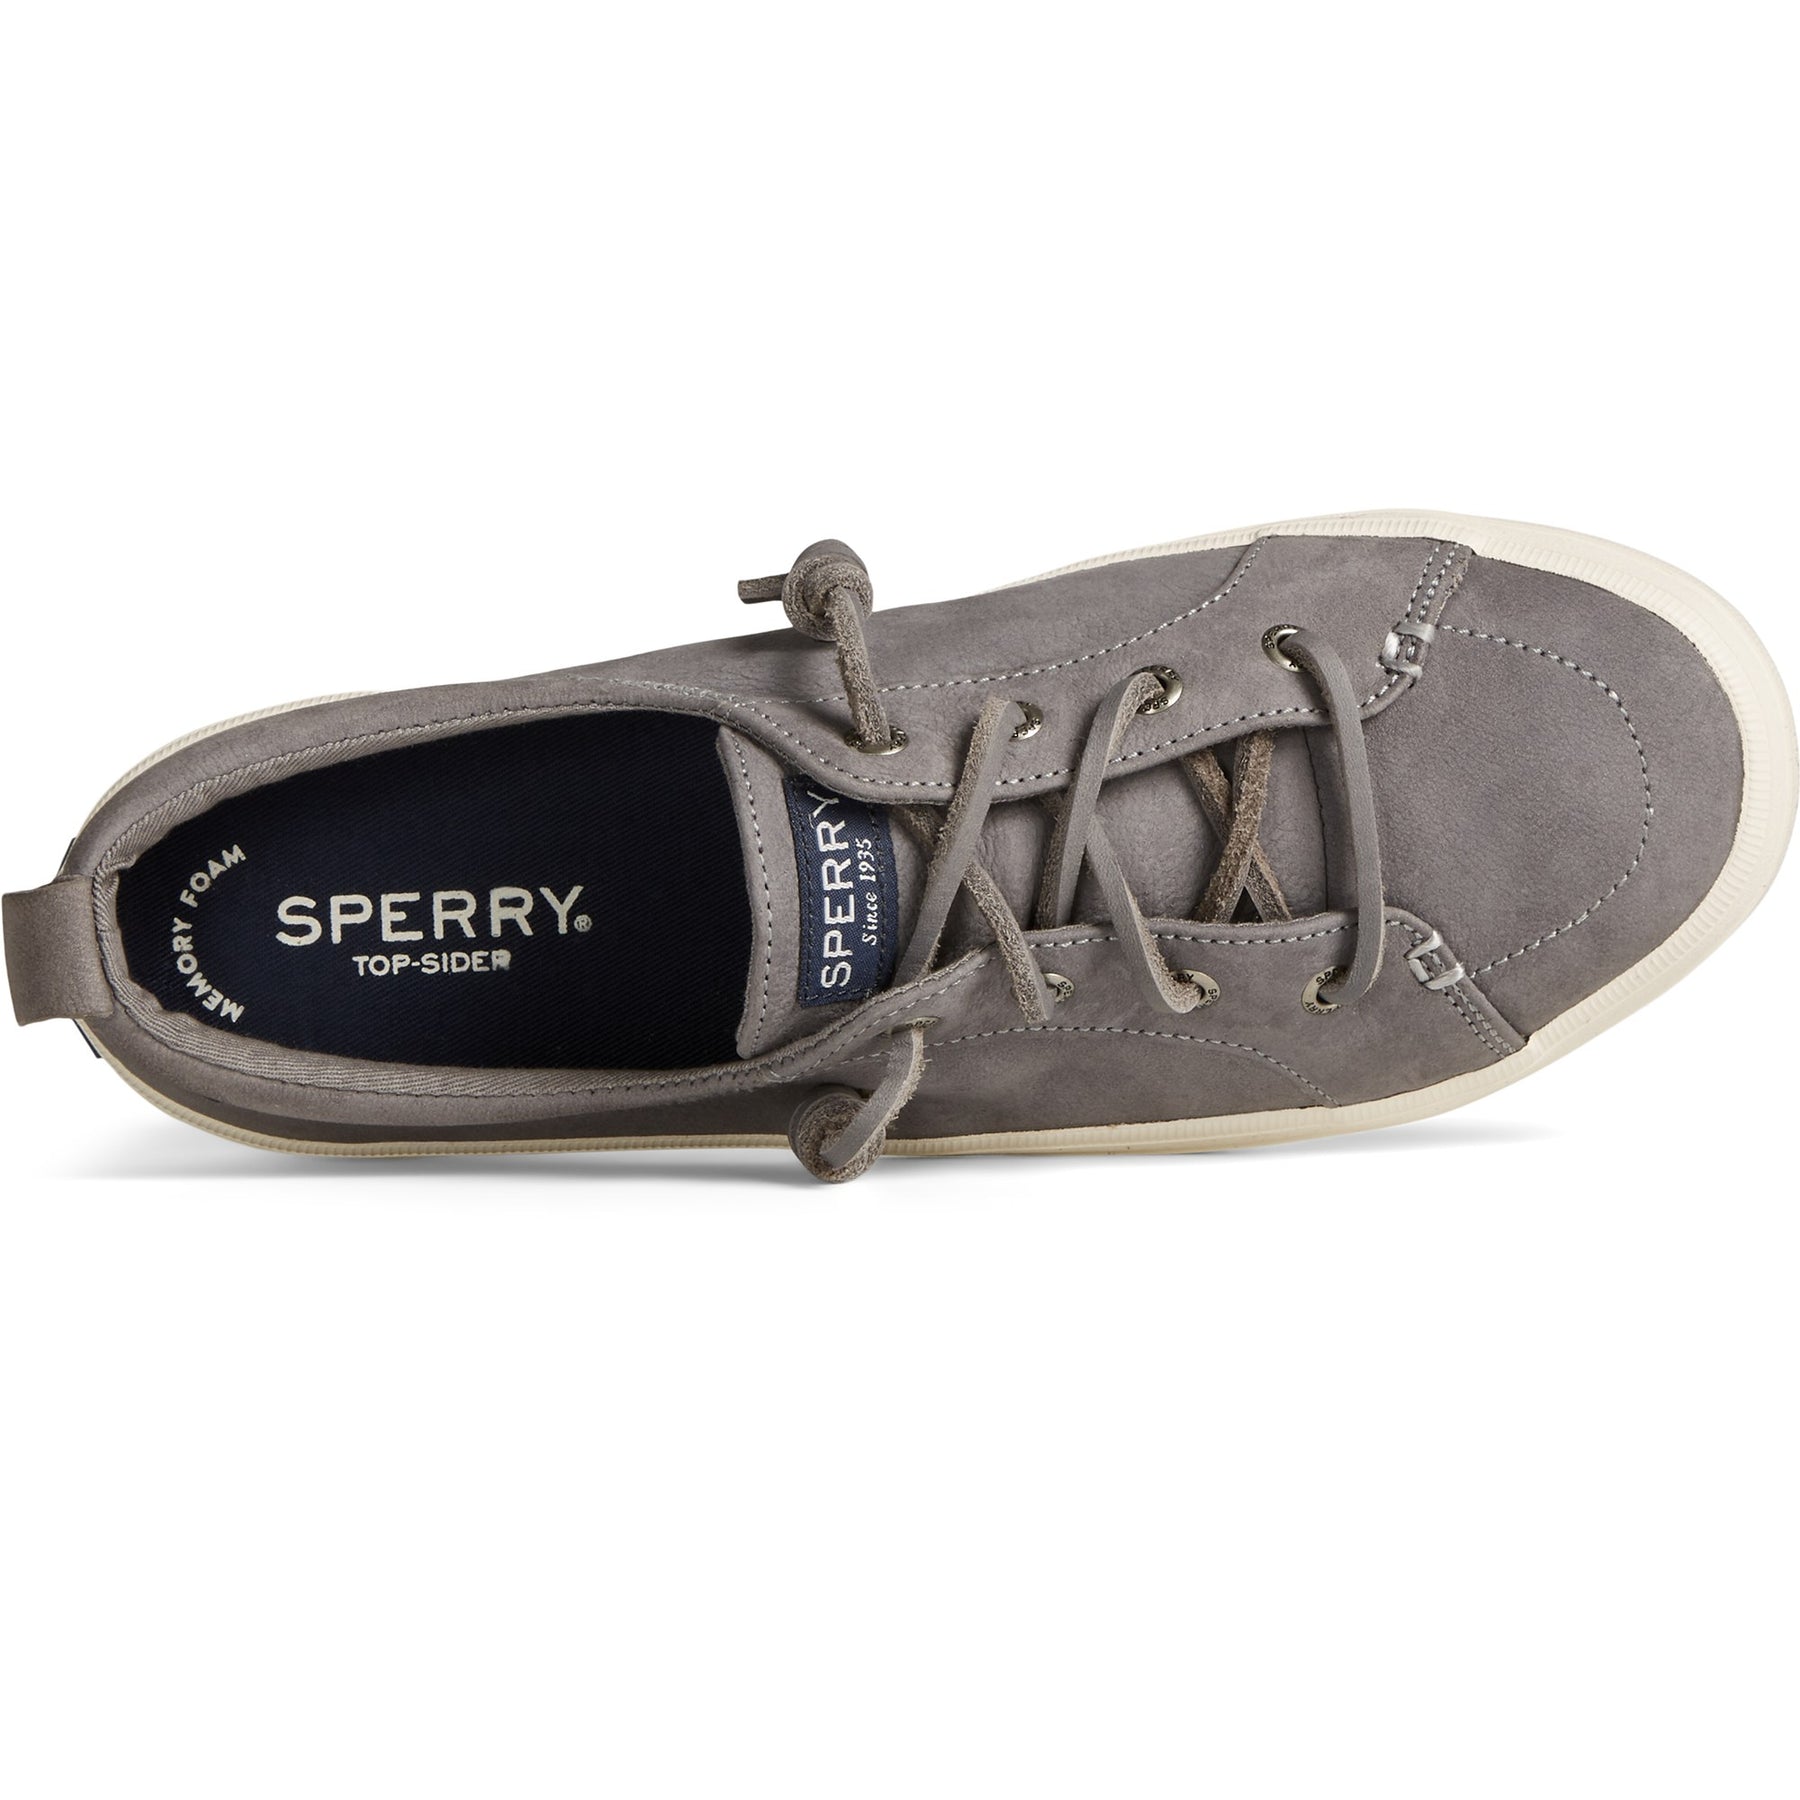 Women's Crest Vibe Tumbled Leather Sneaker - Dark Grey (STS87194)